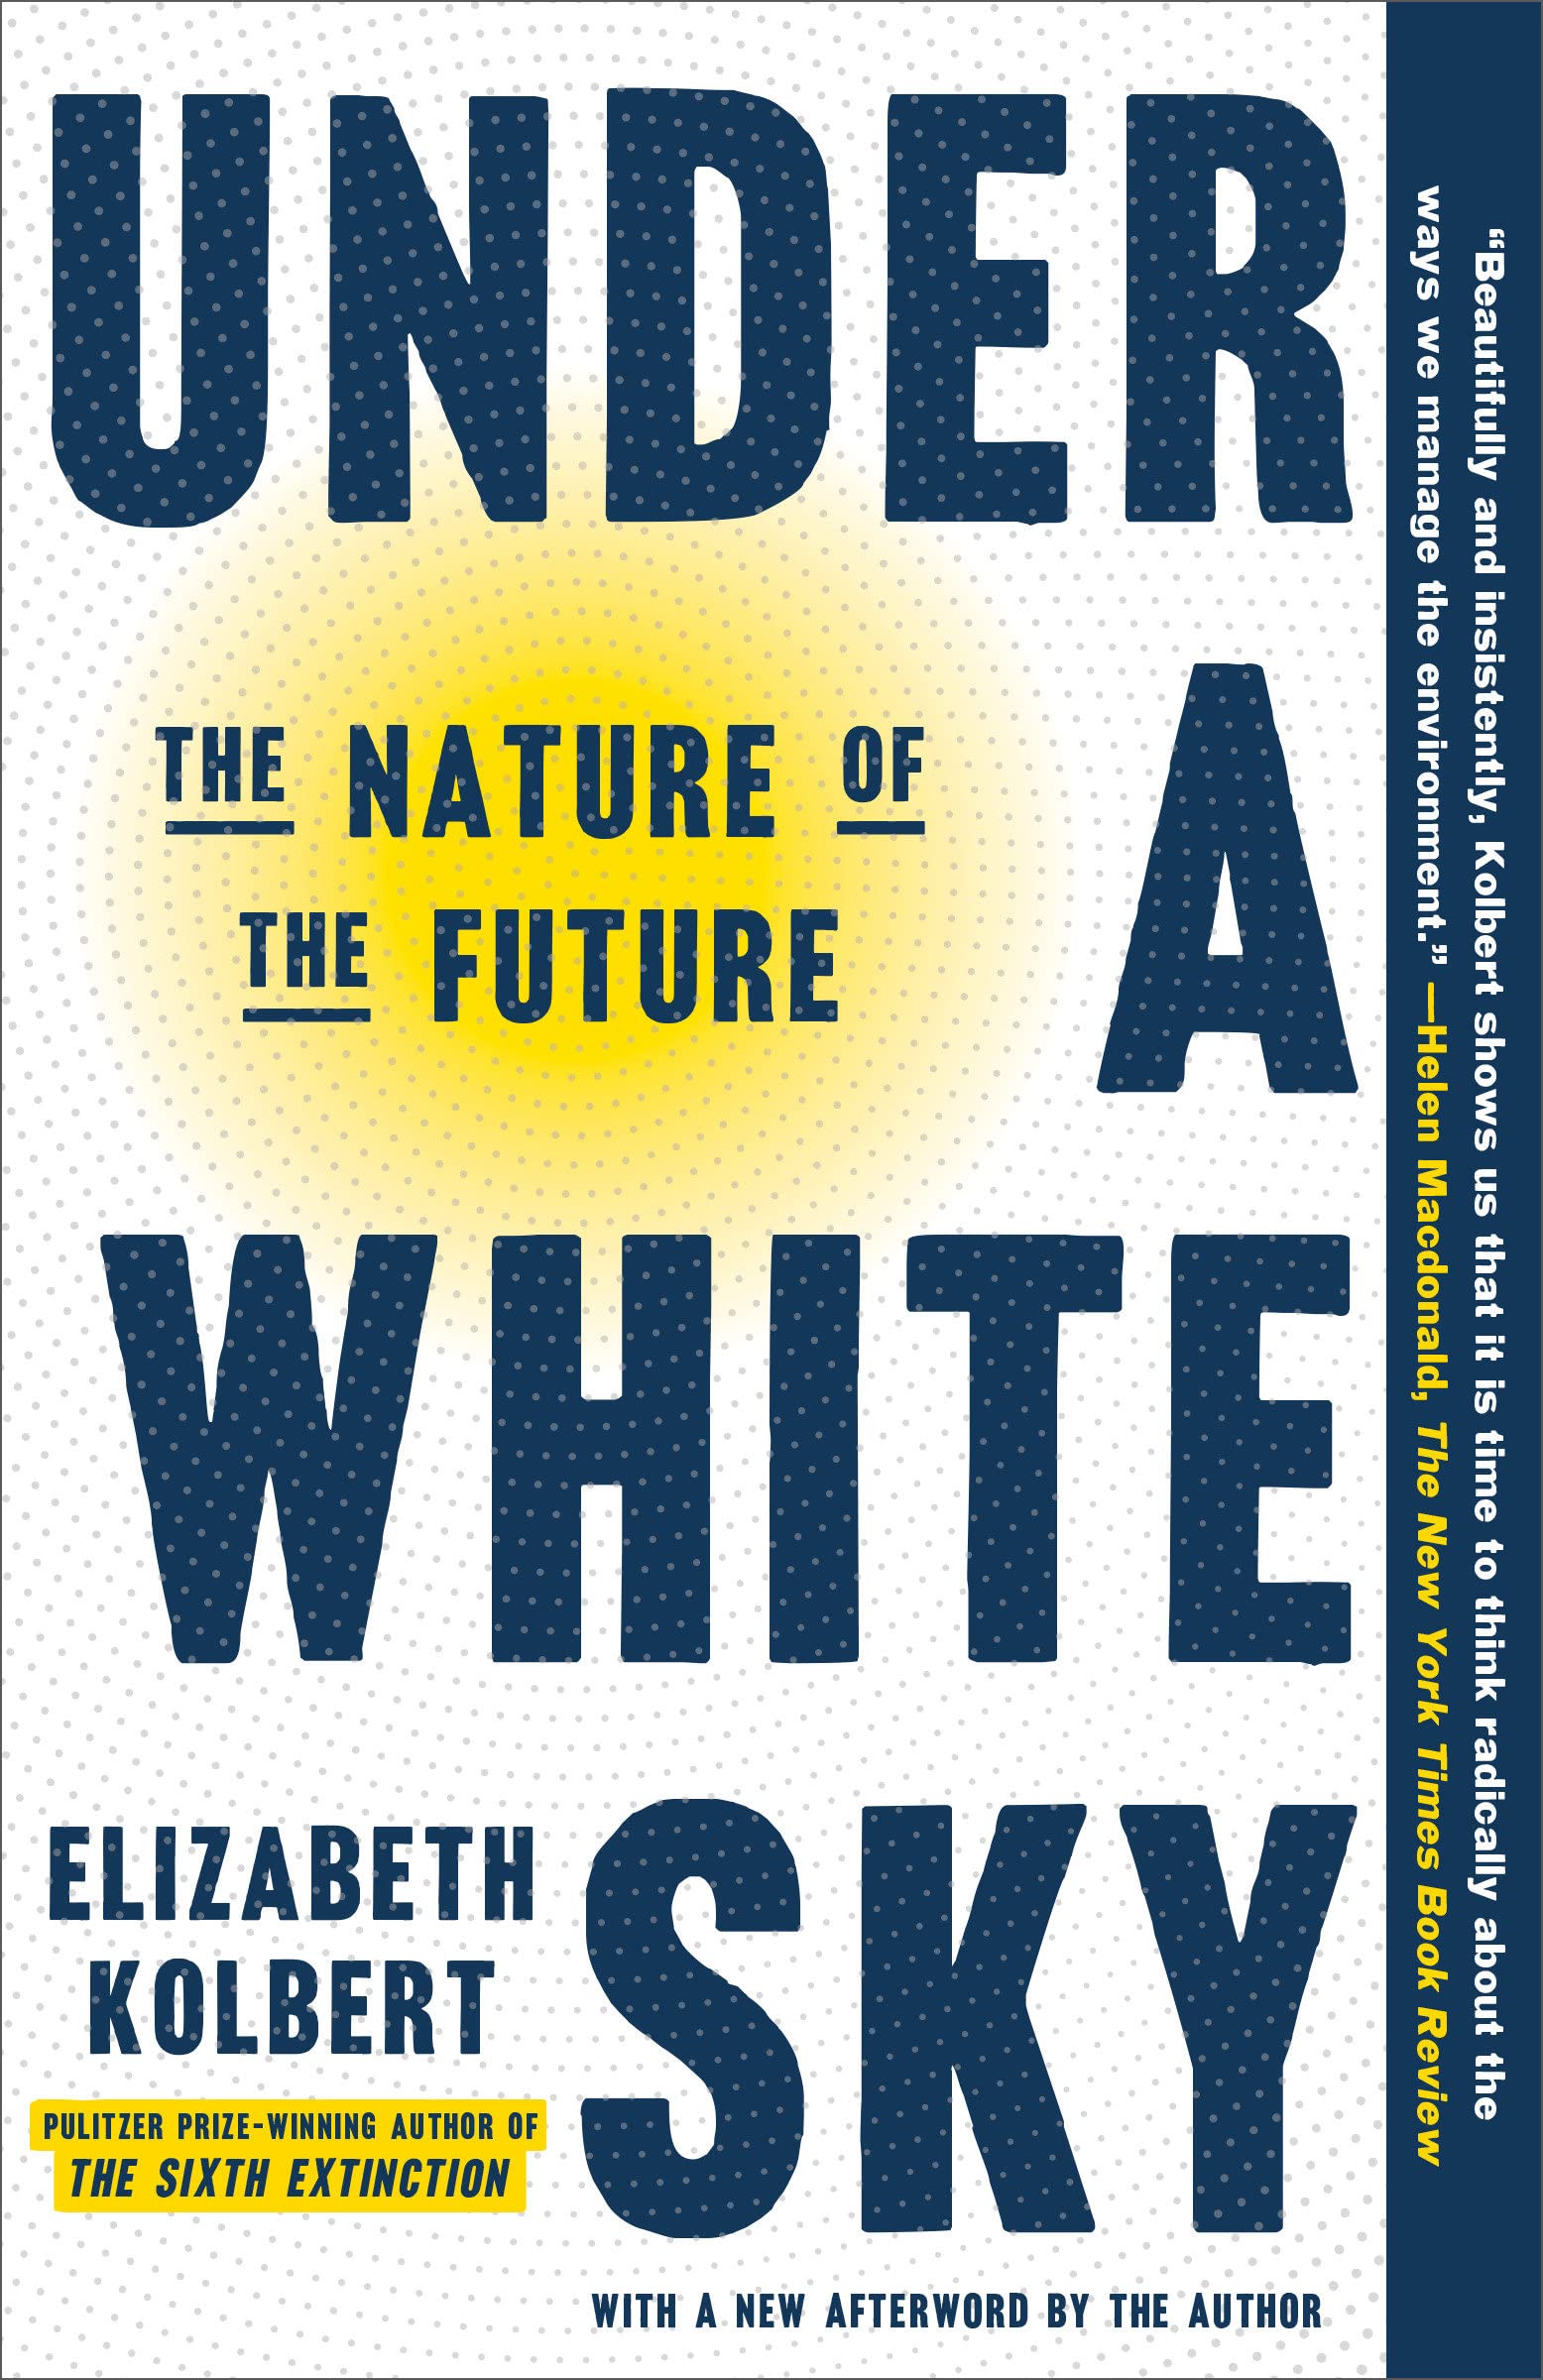 Image Under a white sky : the nature of the future